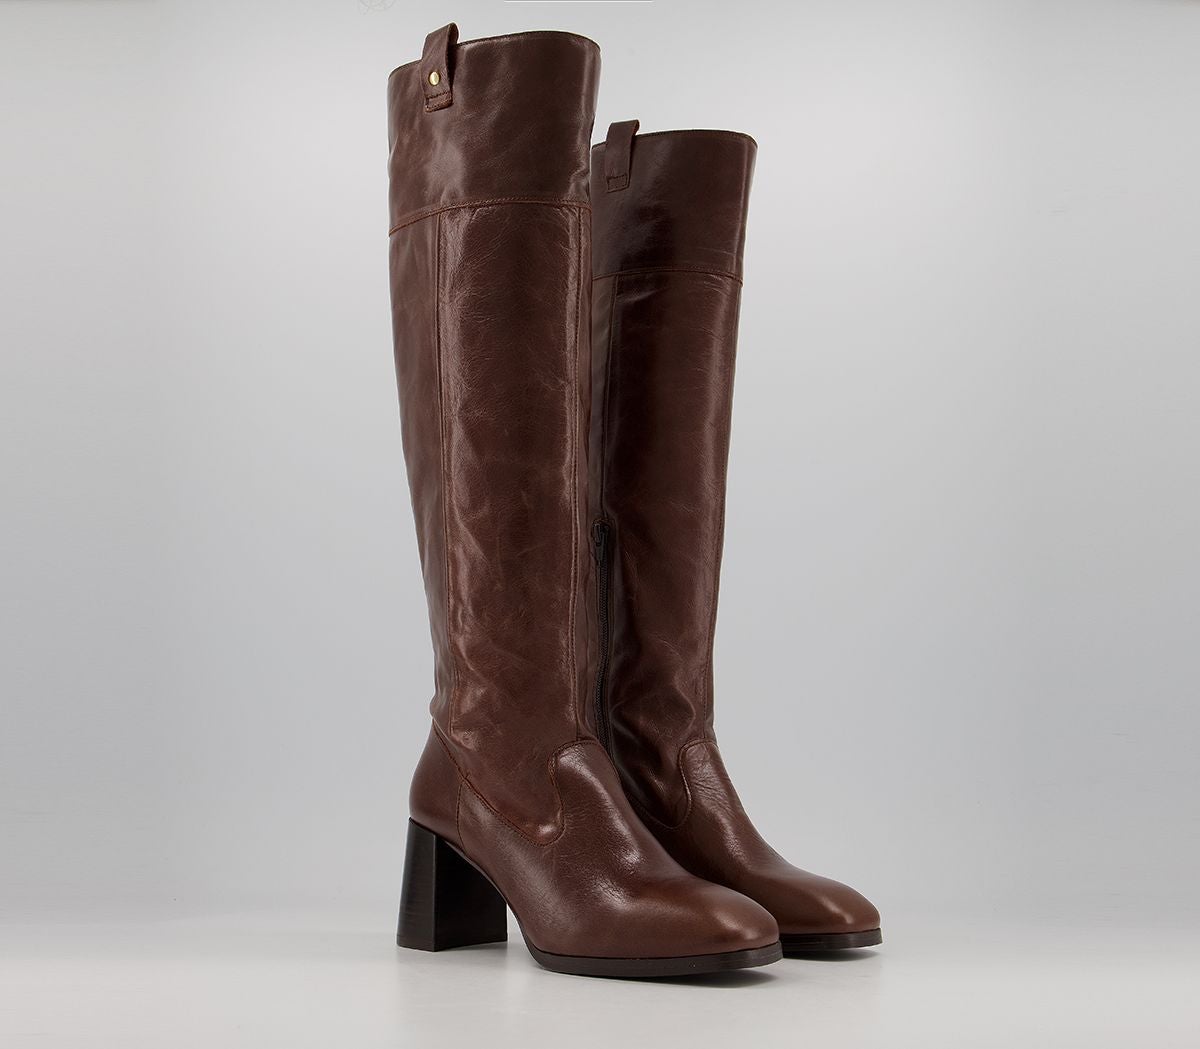 Office + Kacey Platform Knee Boots Chocolate Leather Boots